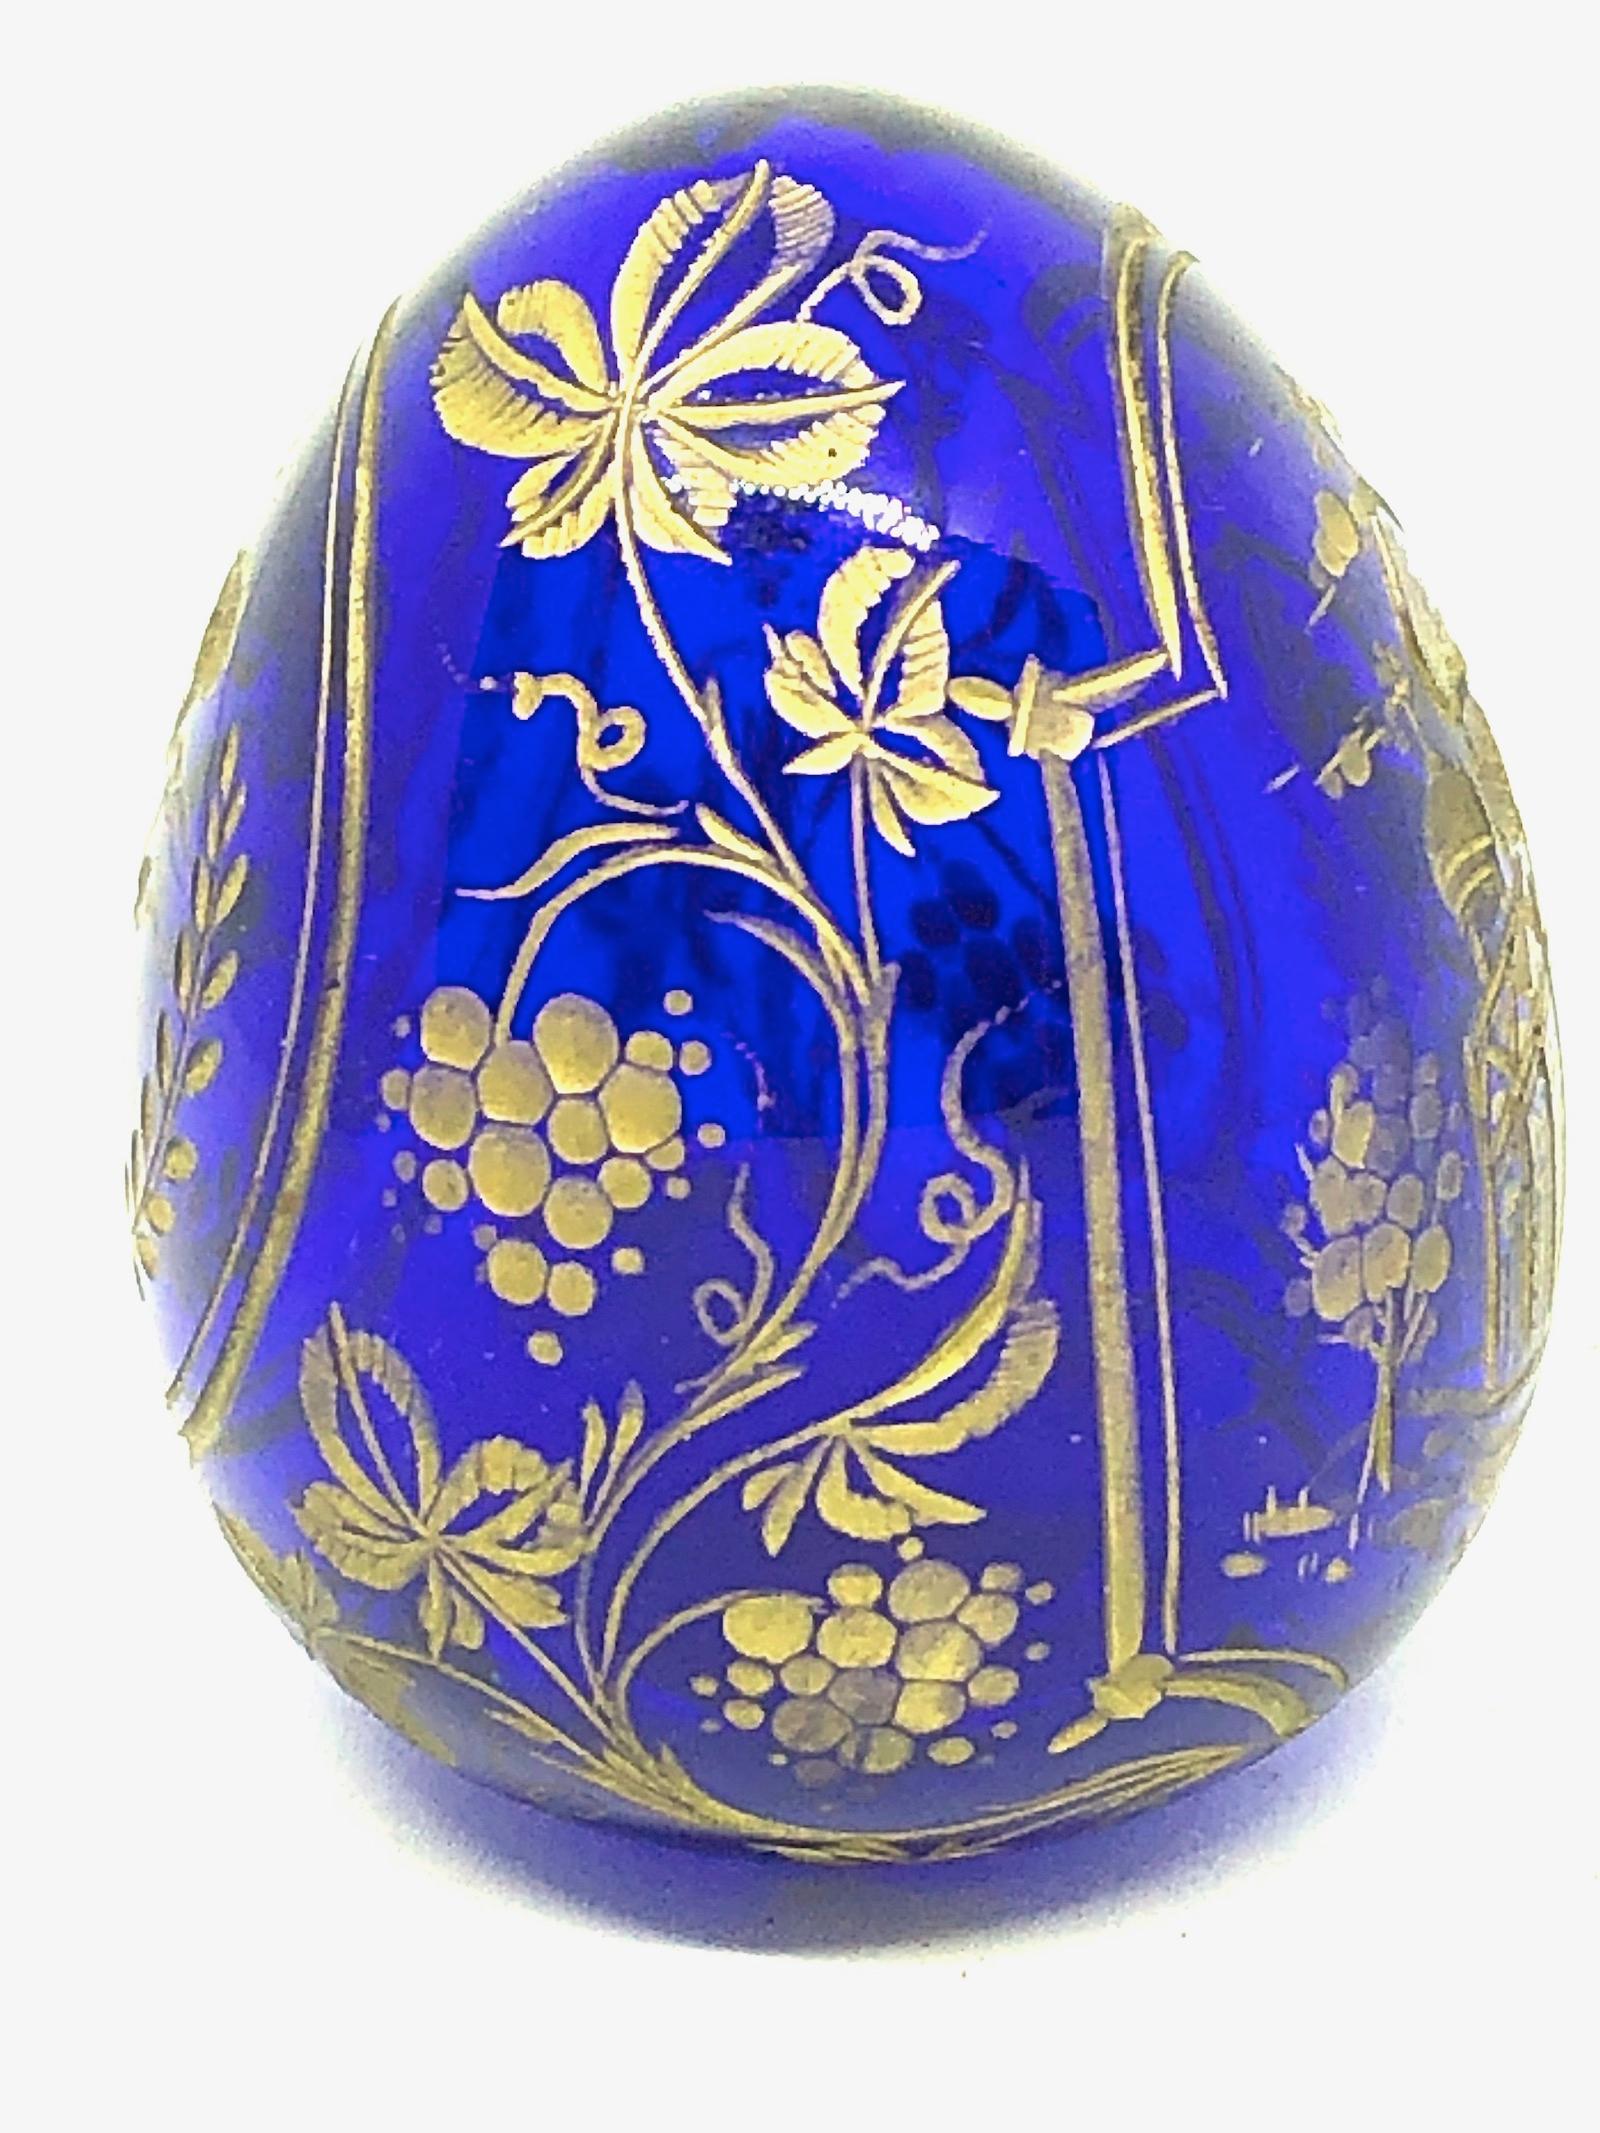 Early 20th Century Vintage Faberge Russia Style Glass Egg with Etched Royal Crown